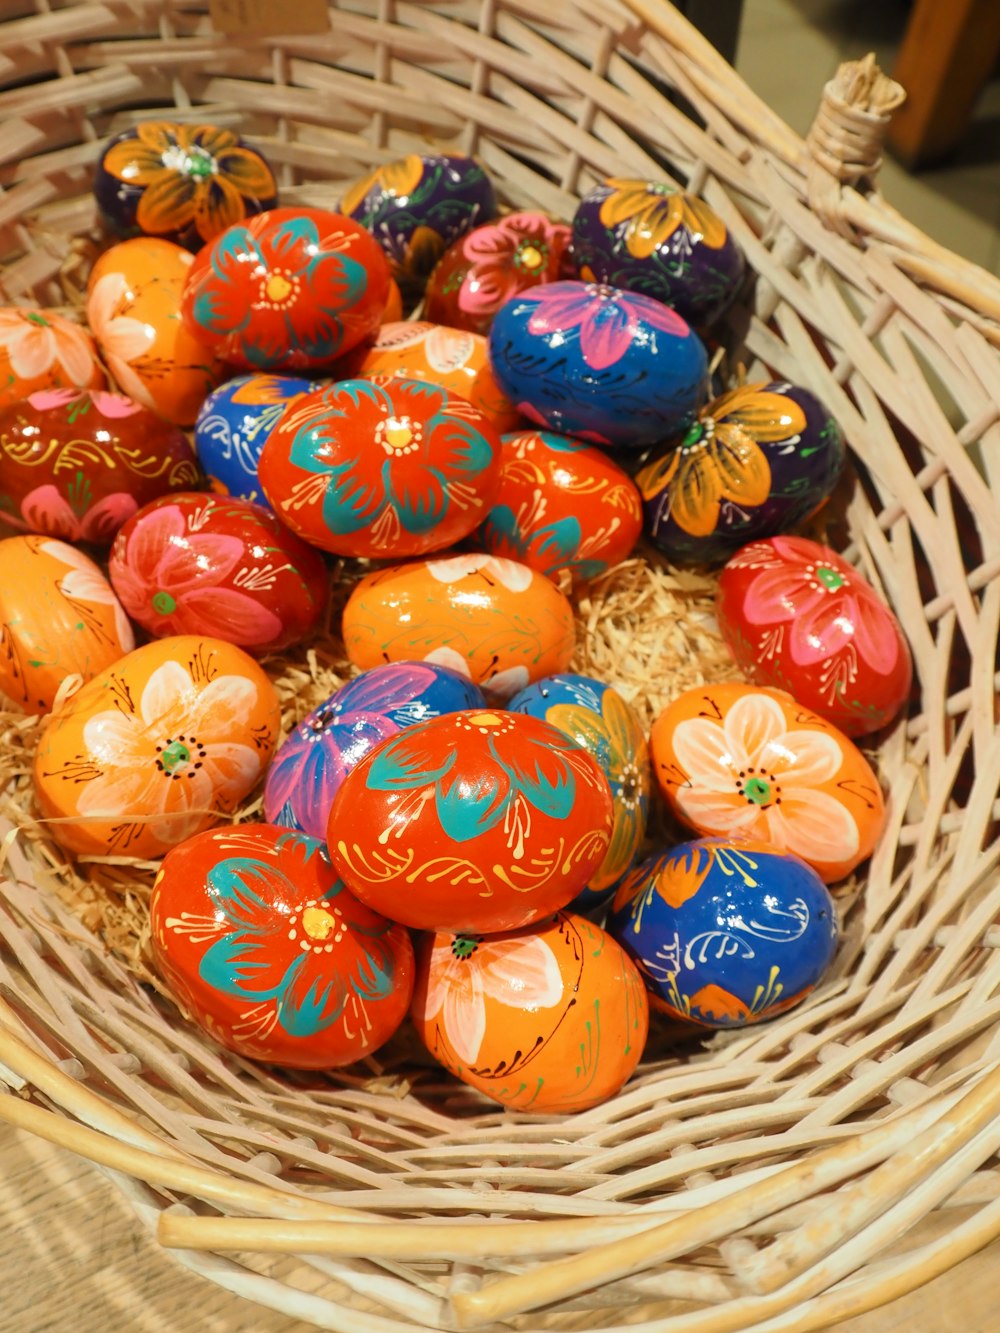 a basket filled with lots of colorful painted eggs